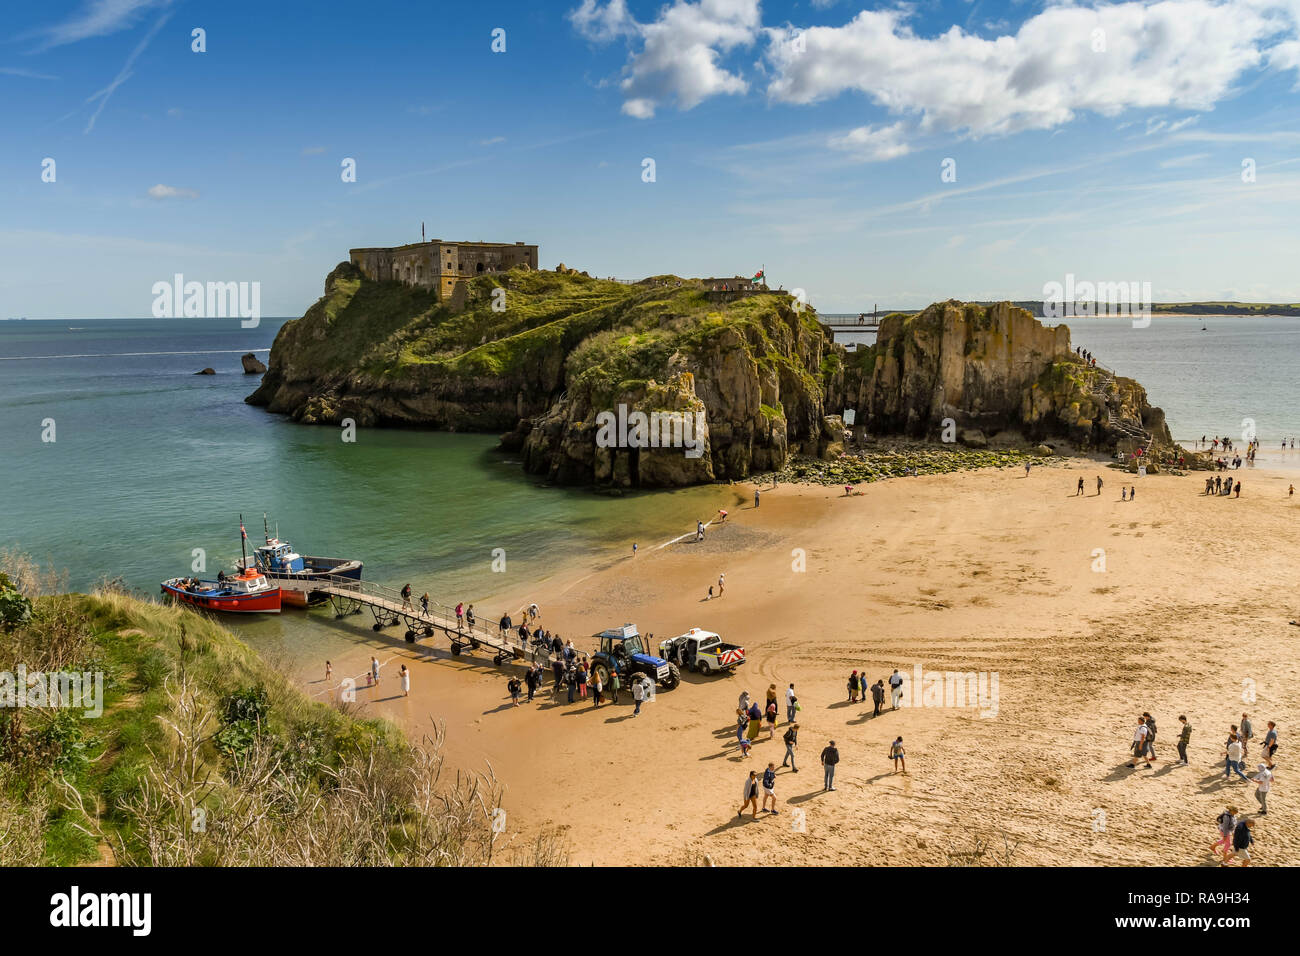 TENBY, PEMBROKESHIRE, WALES - AUGUST 2018: Wide angle view of Castle Beach and St Catherine's Island in Tenby, West Wales at low tide. Visitors are ge Stock Photo